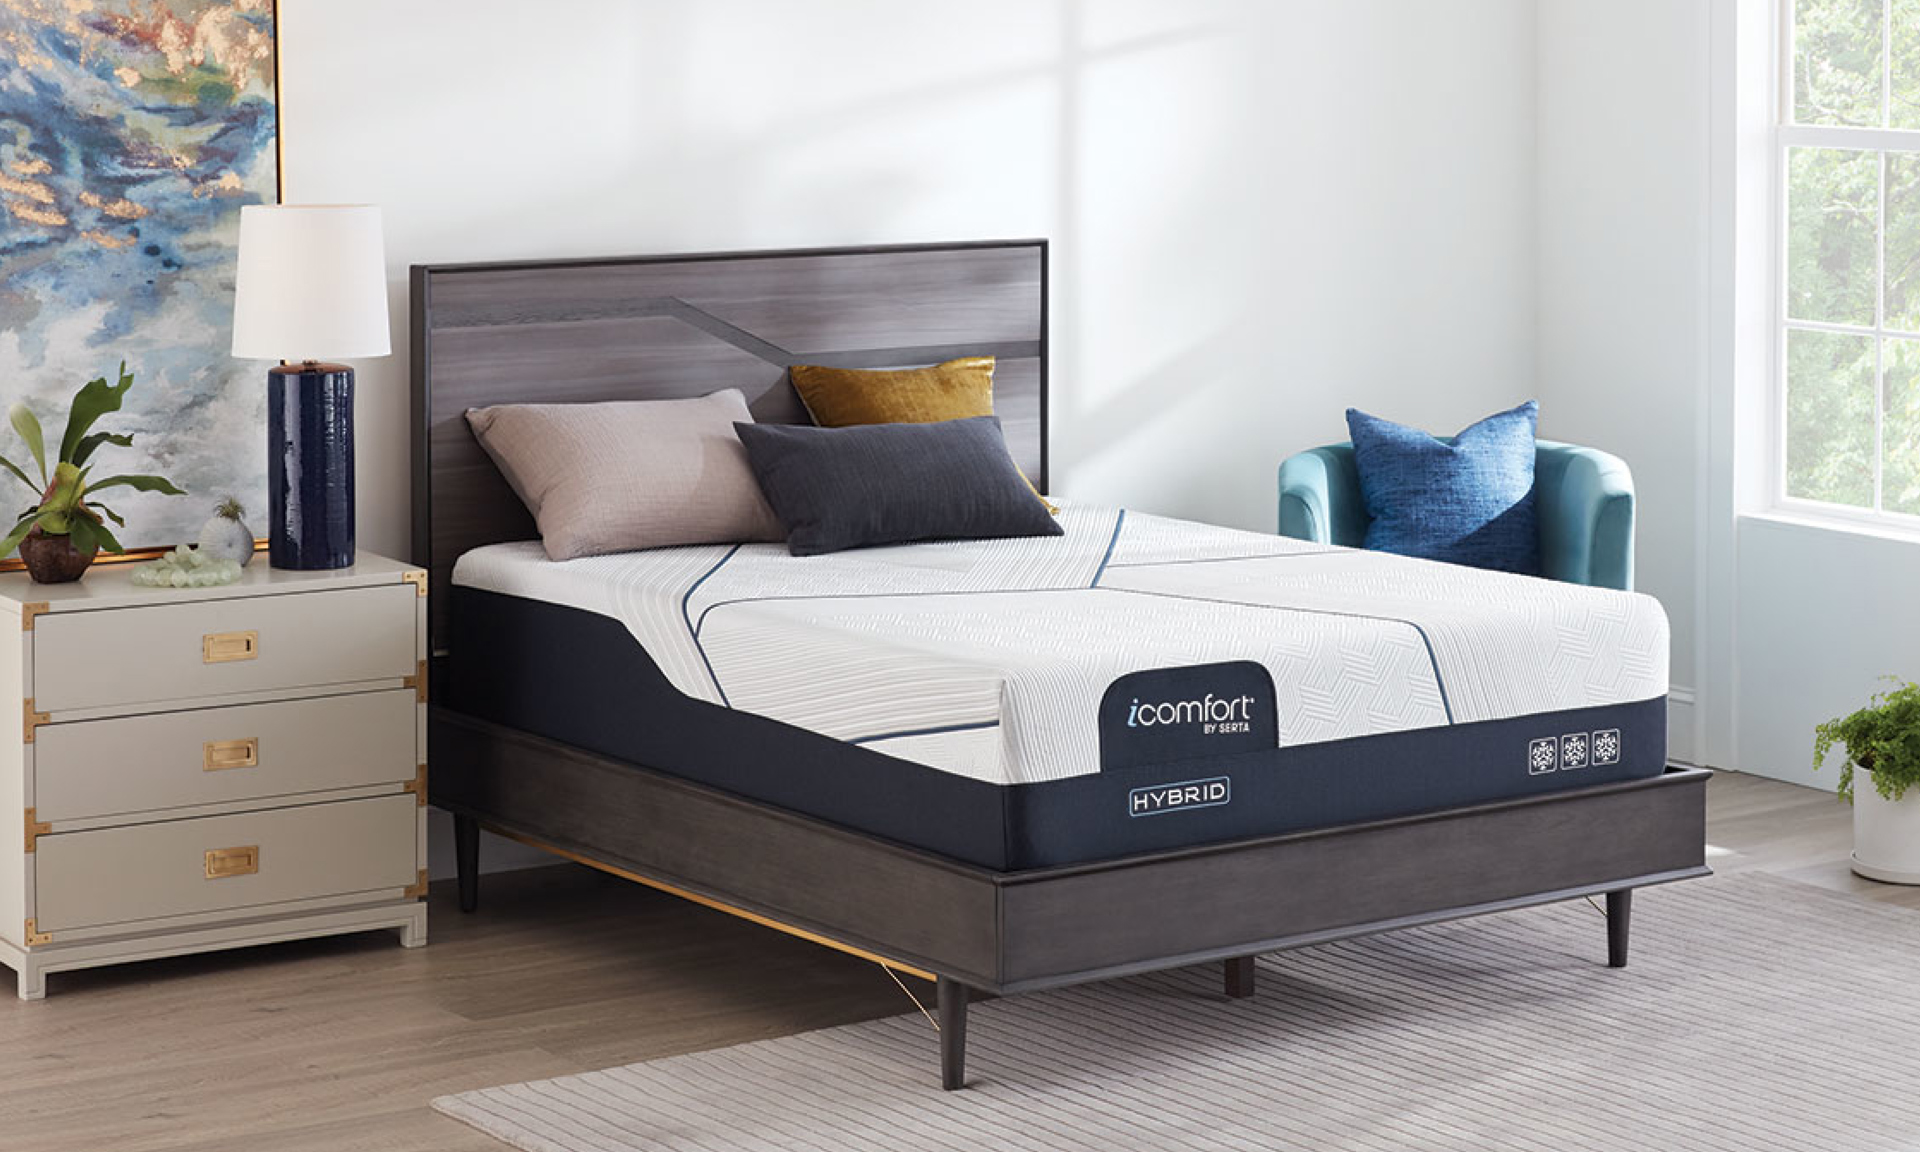 Serta iComfort contours and cradles you helping you get a good night's sleep.